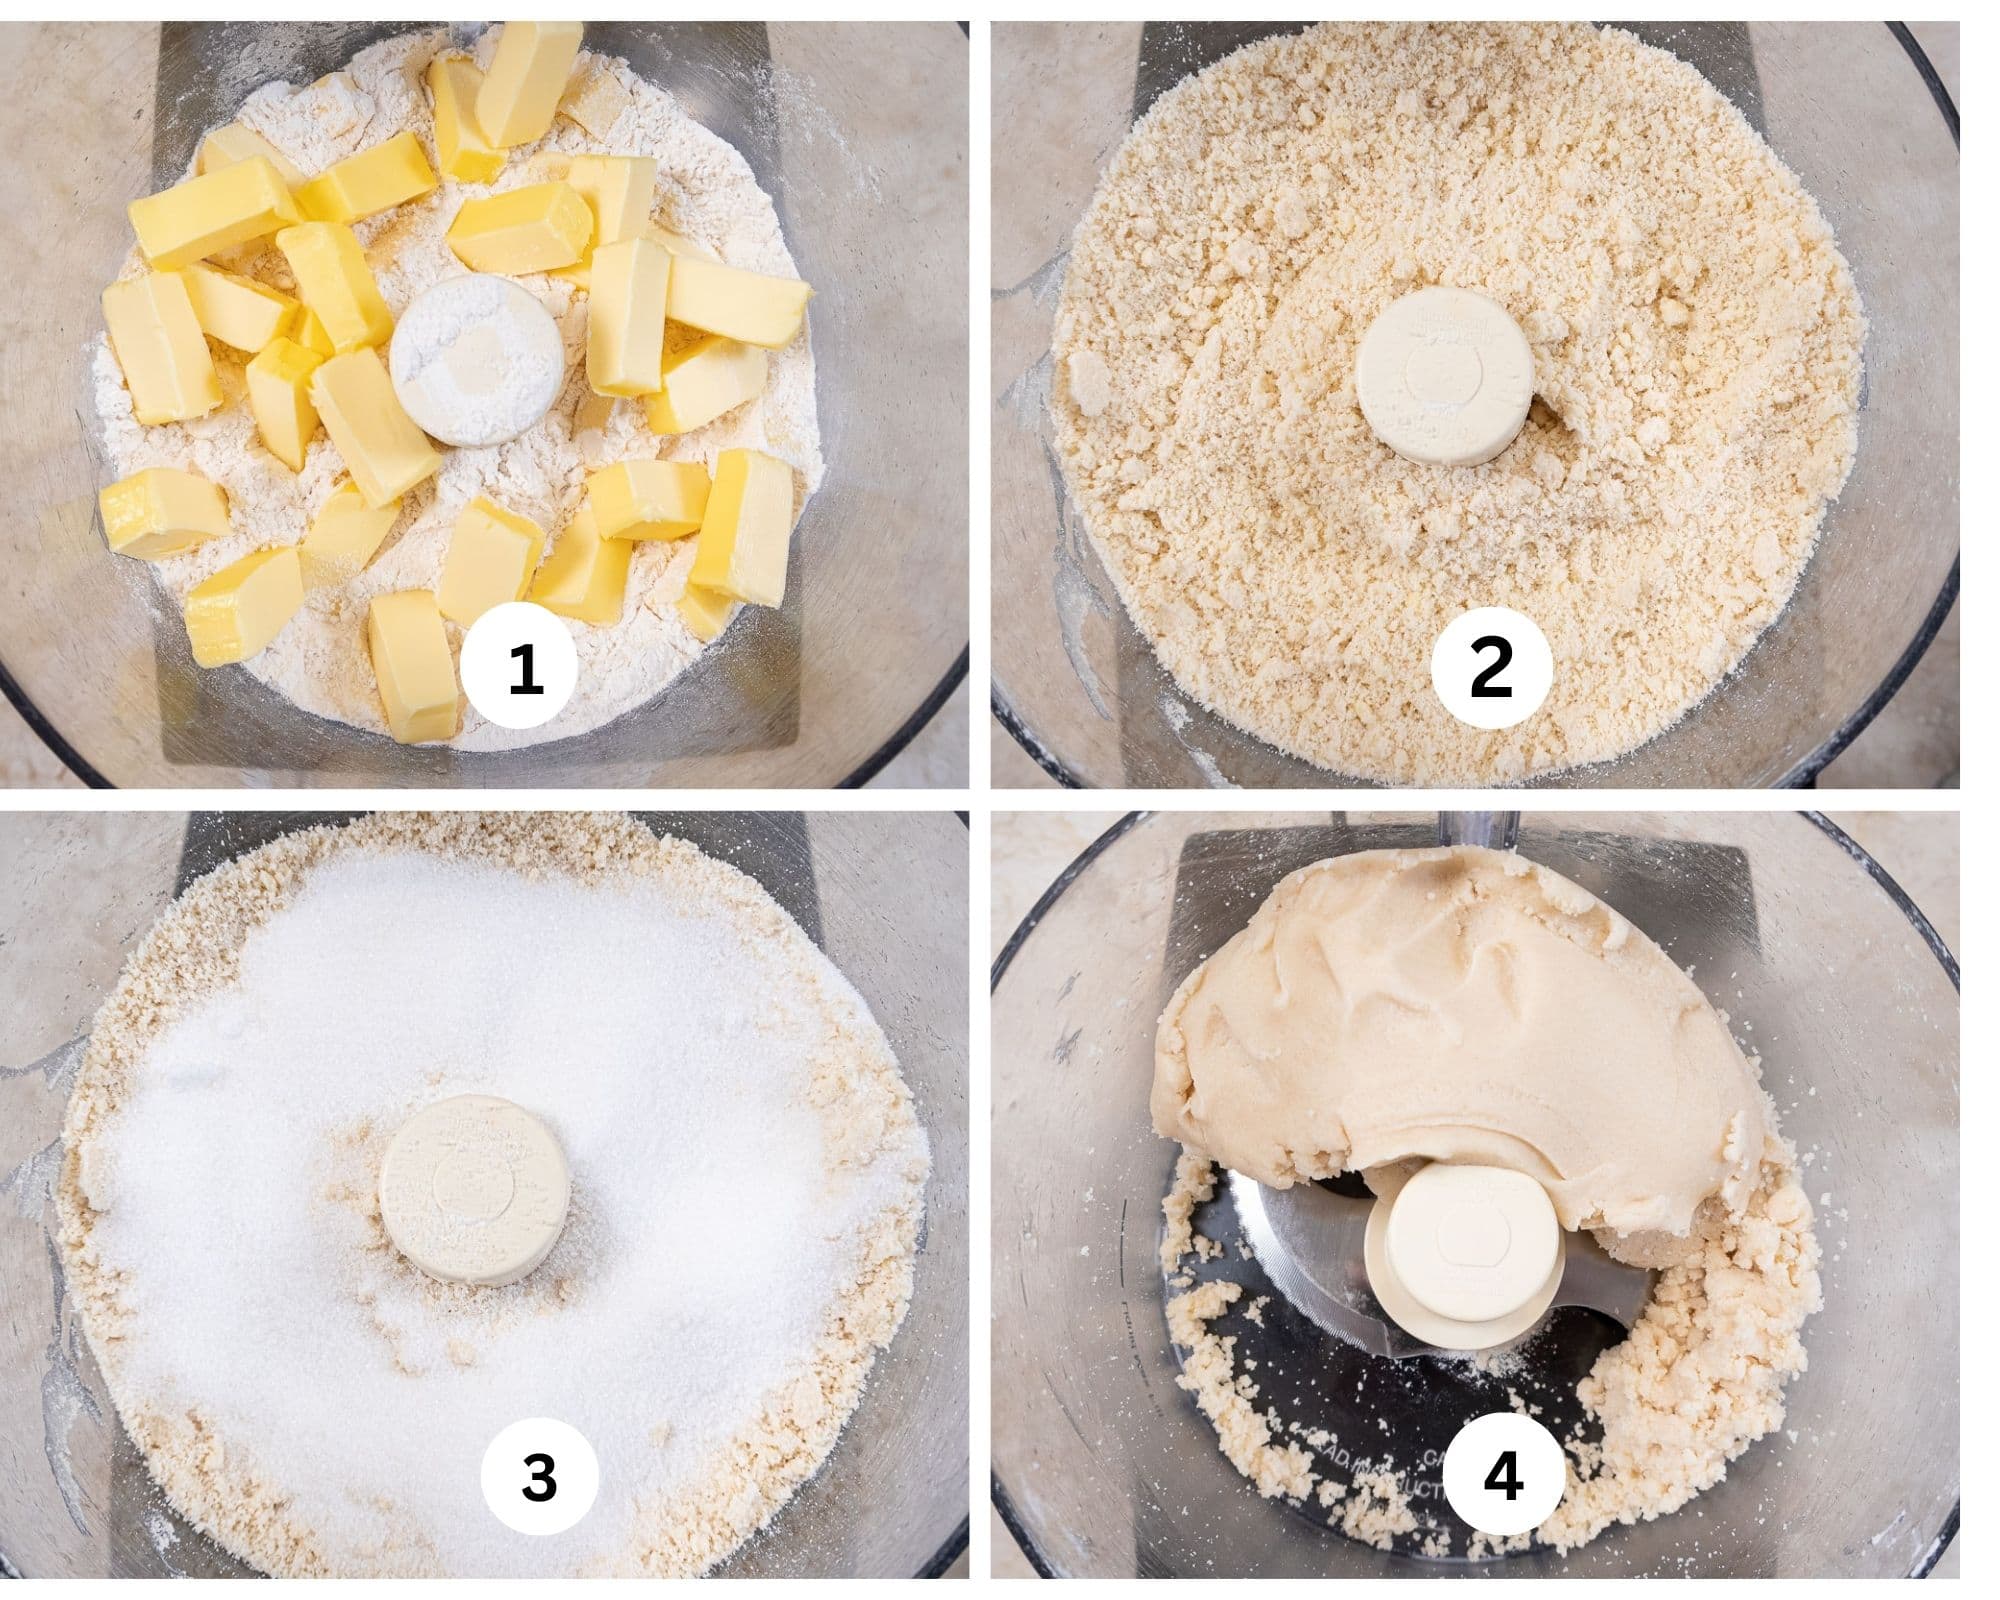 The first collage shows the shortbreads being made in the processor.